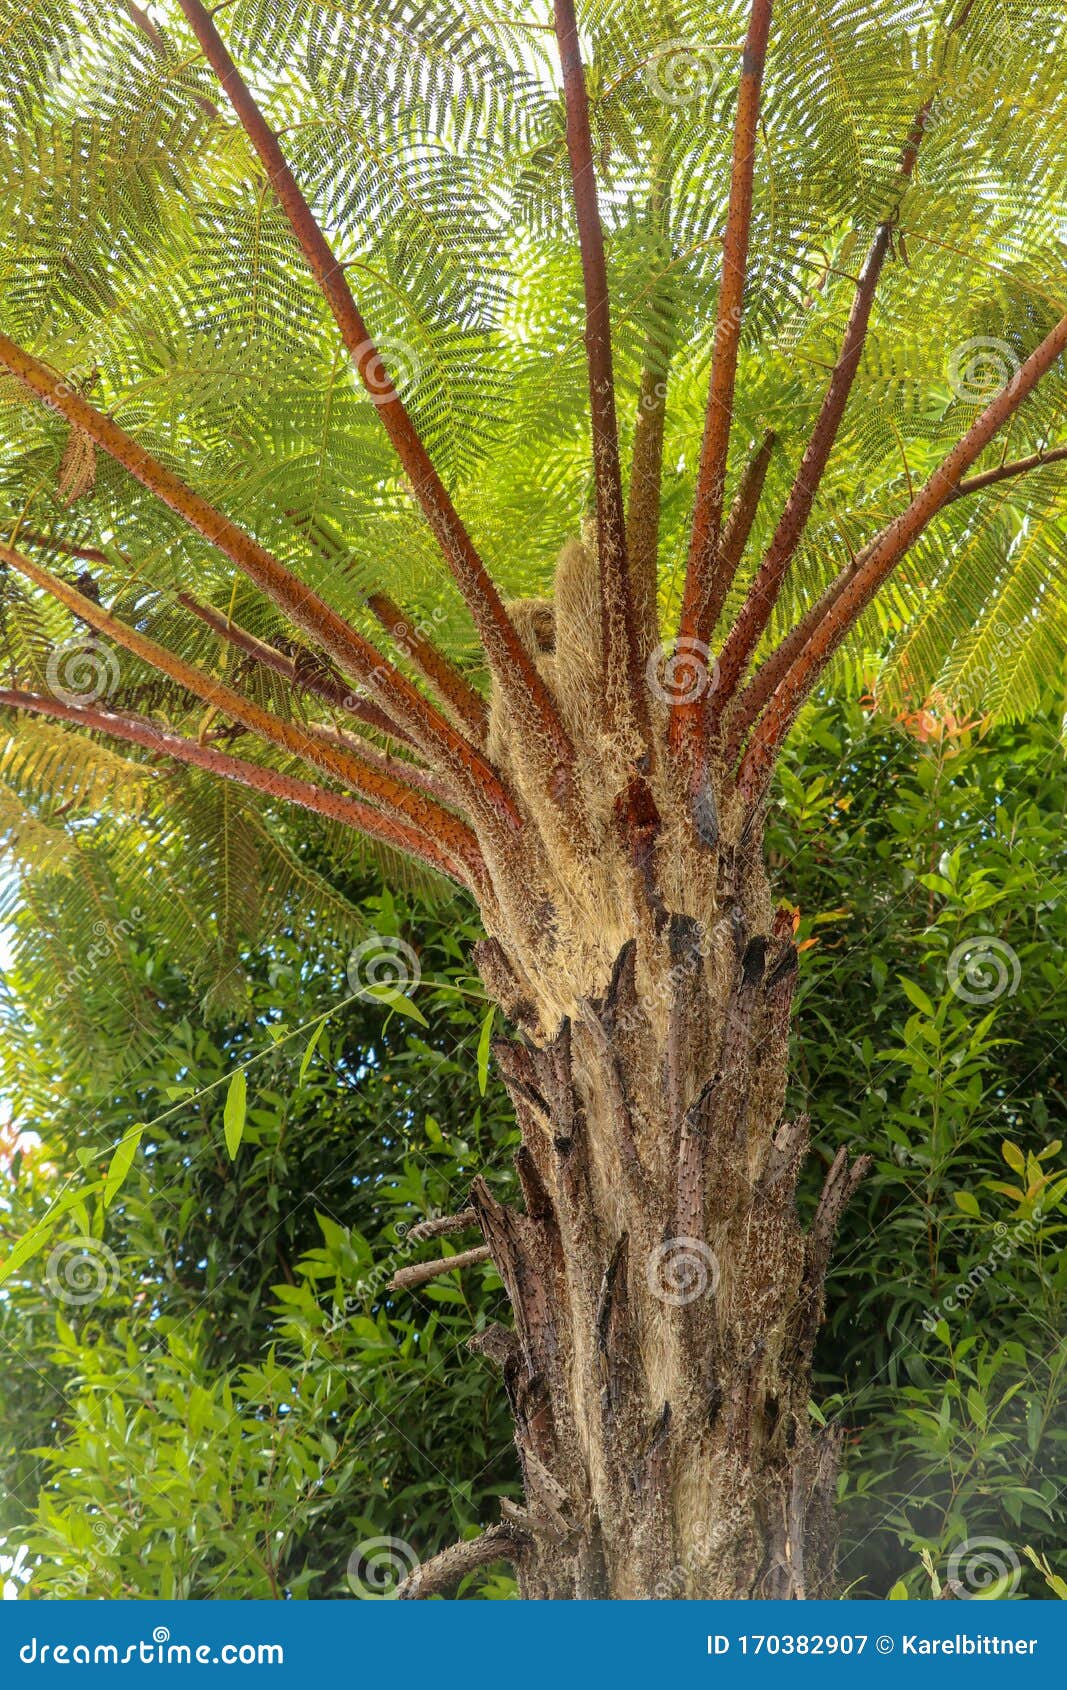 crown of tropical tree cyathea arborea. close up of branches of west indian treefern. the surface of the helecho gigante strain is